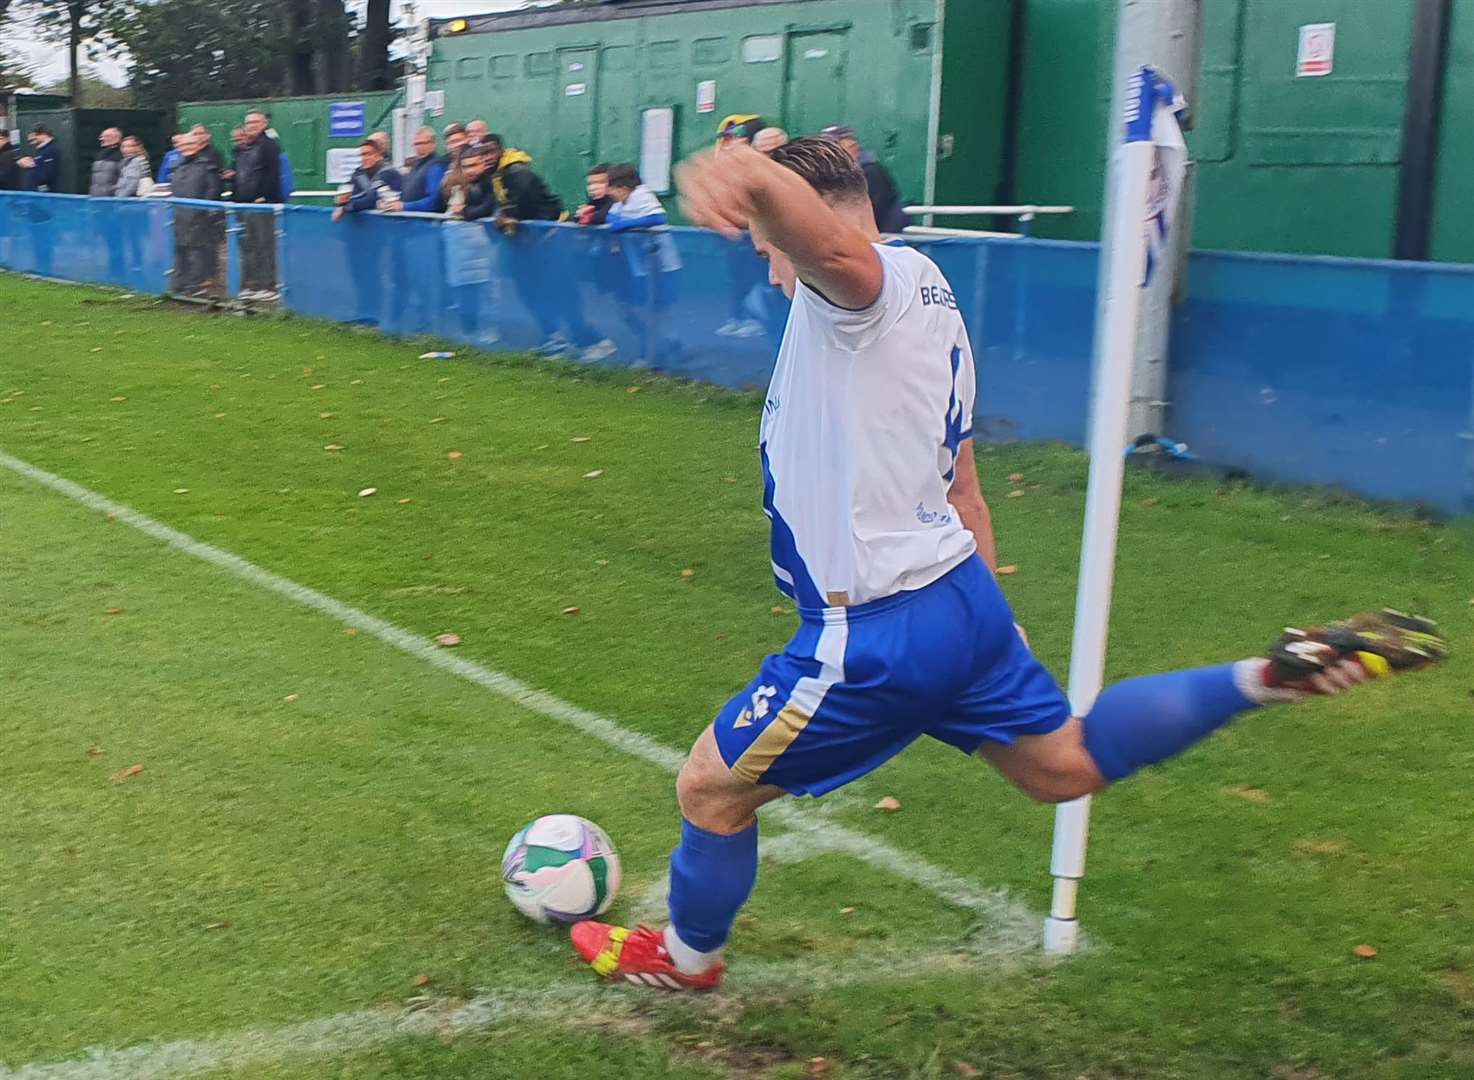 Bearsted midfielder Adam Turton, who claimed the assist for the game’s only goal, whips in a corner in Saturday’s 1-0 Southern Counties East Premier Division home win against Corinthian